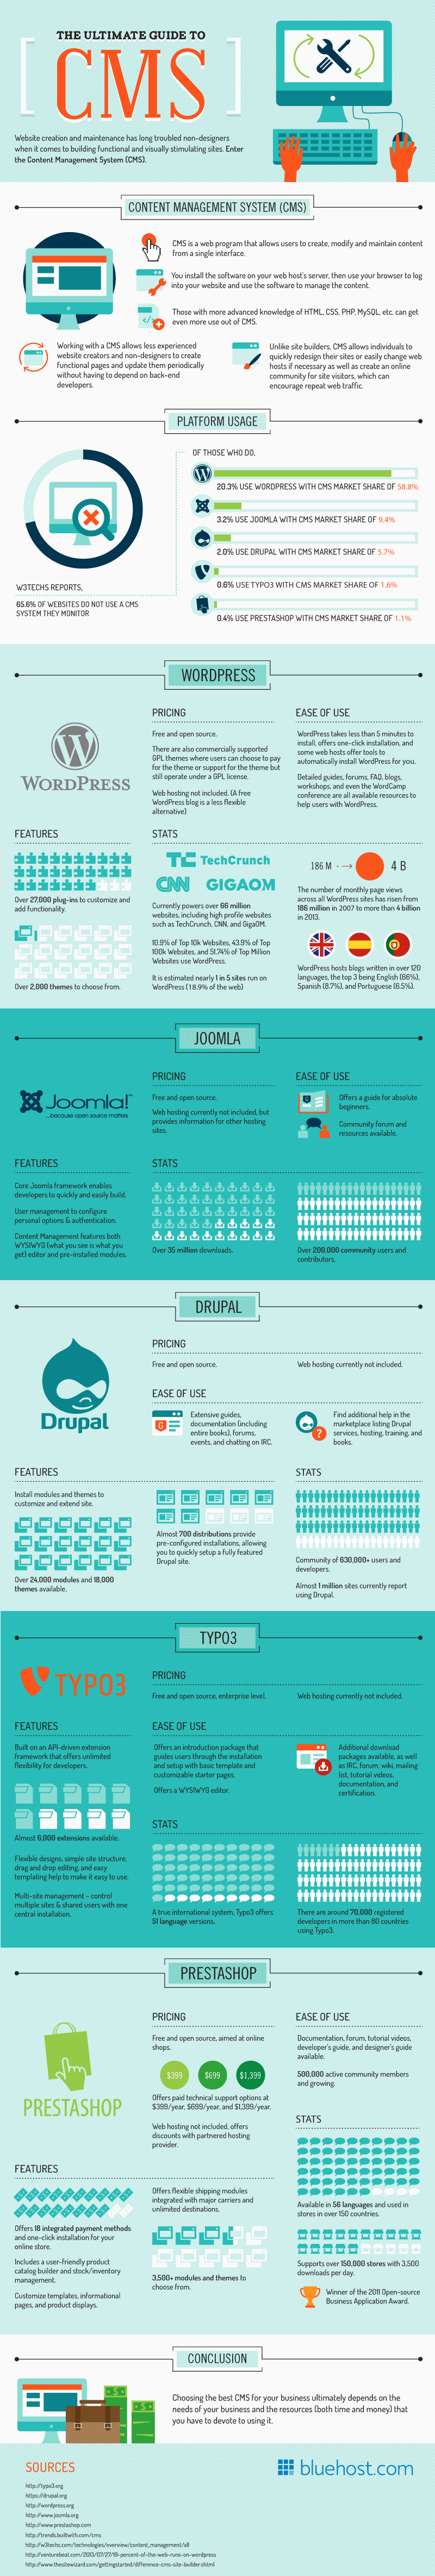 The Ultimate Guide To CMS - #Infographic